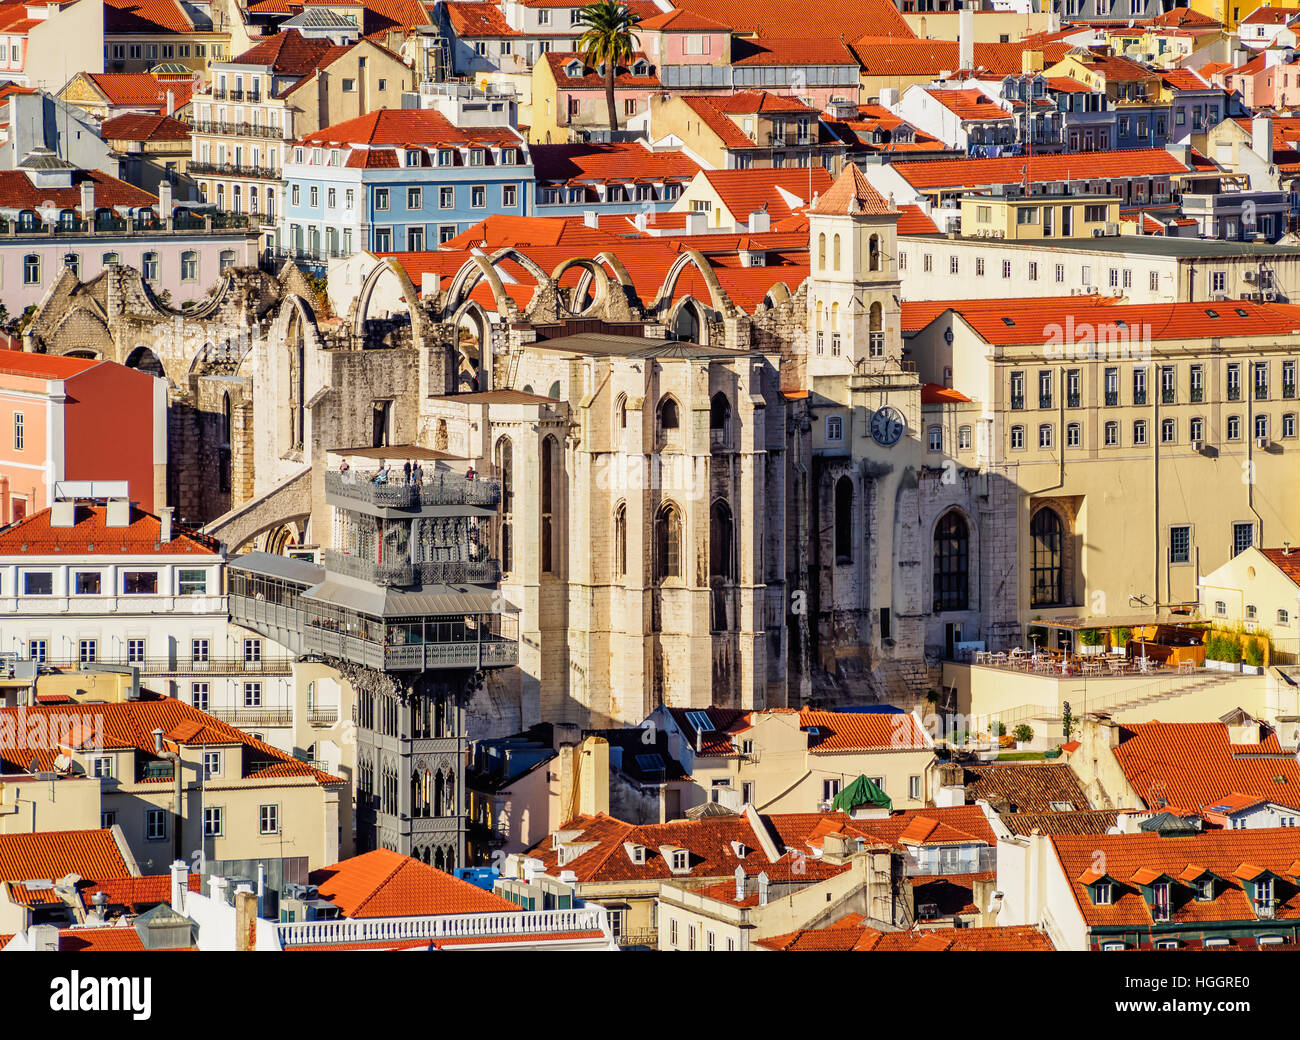 Portugal, Lisbon, Elevated view of the Santa Justa Lift and Carmo Convent. Stock Photo